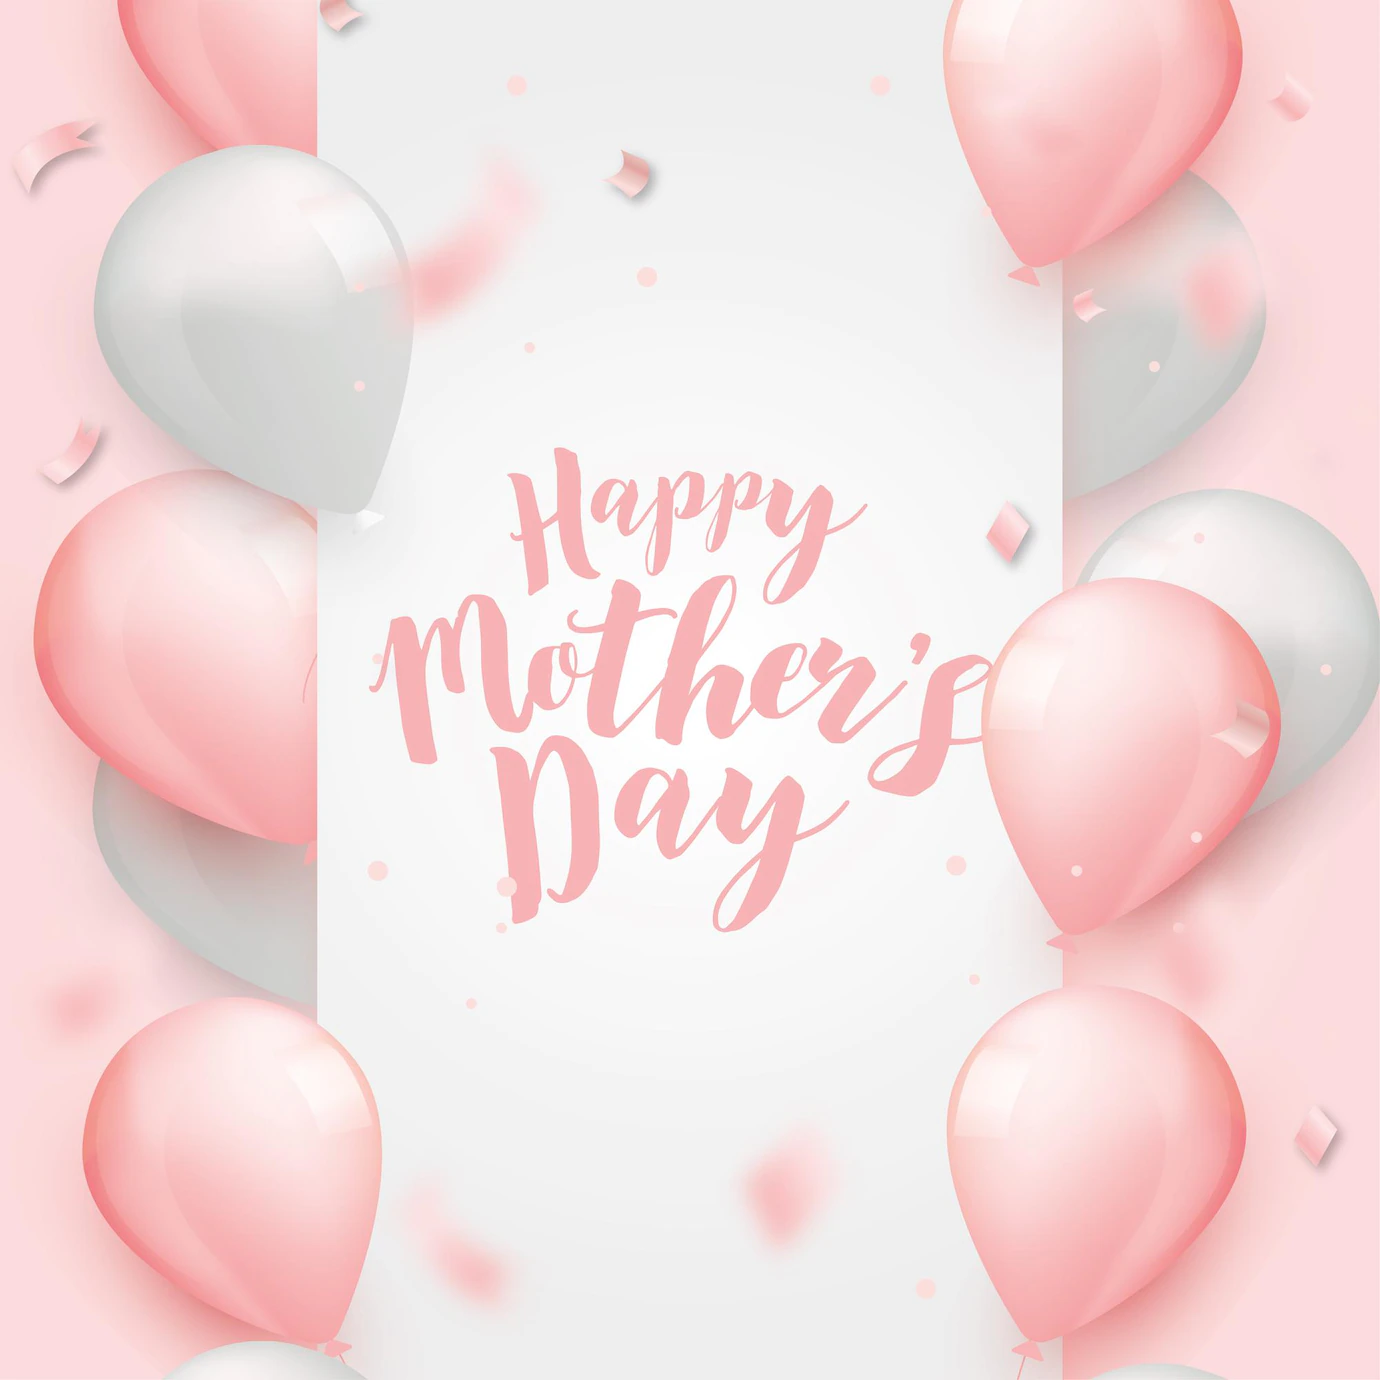 Happy Mothers Day Frame With Realistic Balloons 1361 3365